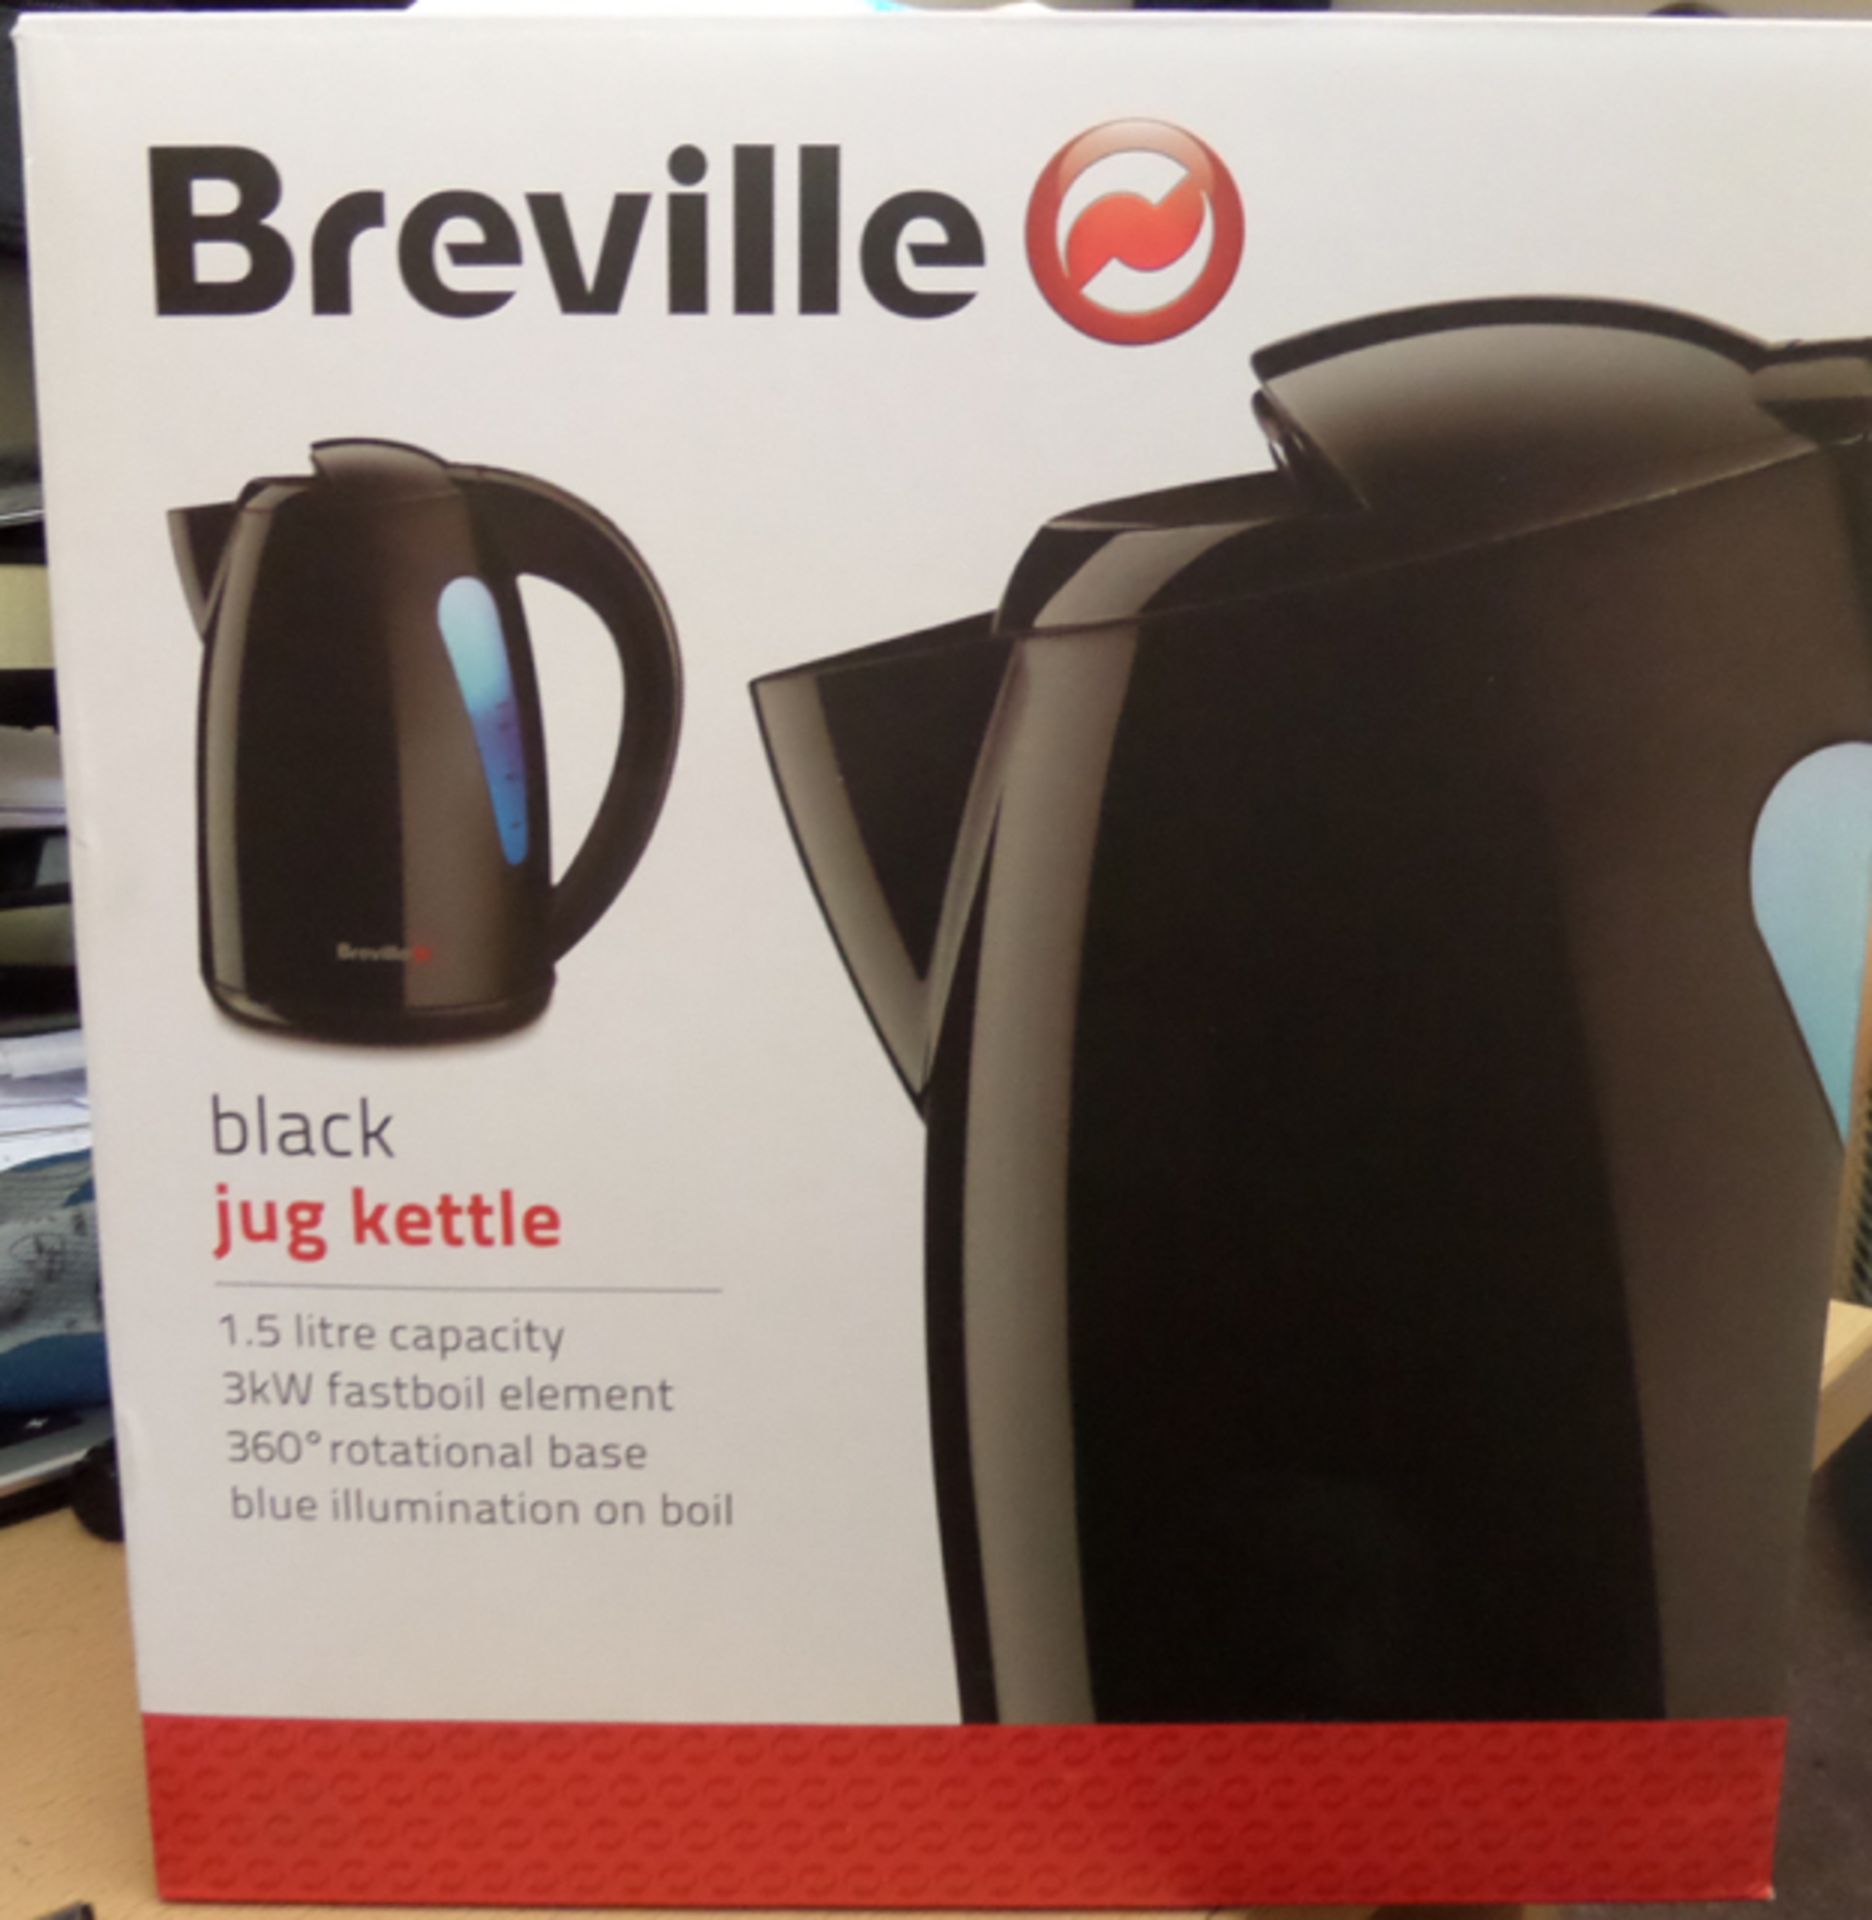 1 x BREVILLE 1.5L 3KW Fastboil jug kettles, BRAND NEW AND BOXED. 360 degree rotational base, blue